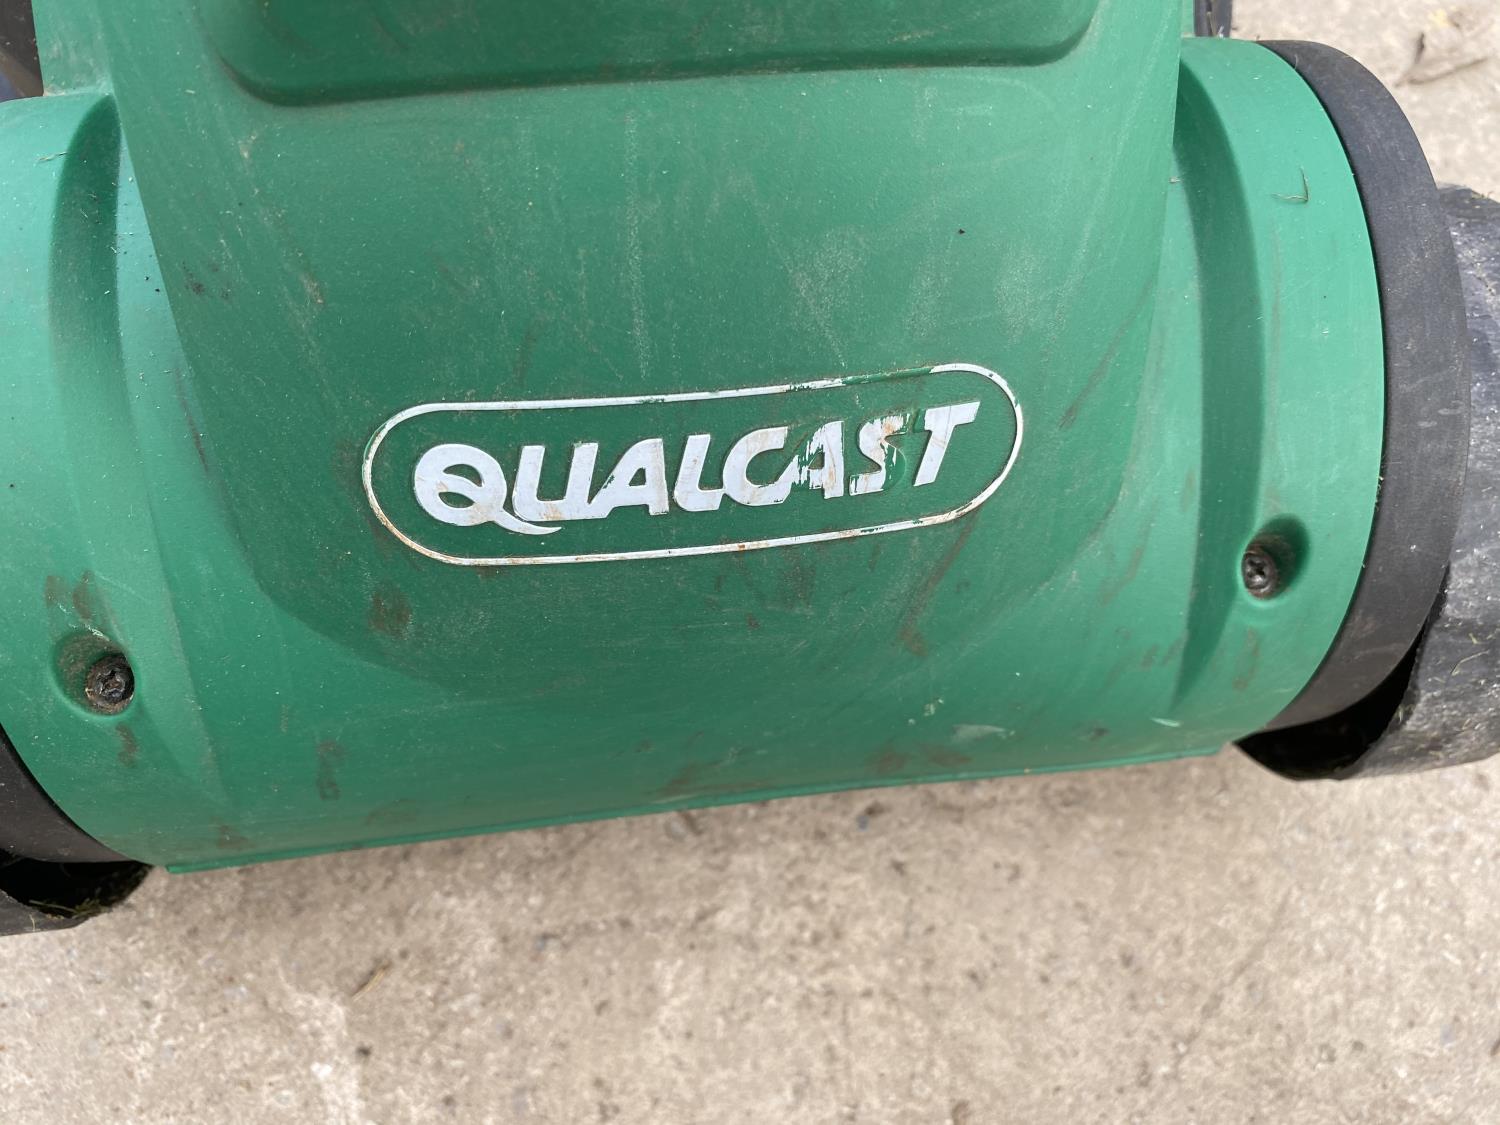 A QUALCAST ELECTRIC LAWN MOWER - Image 3 of 5